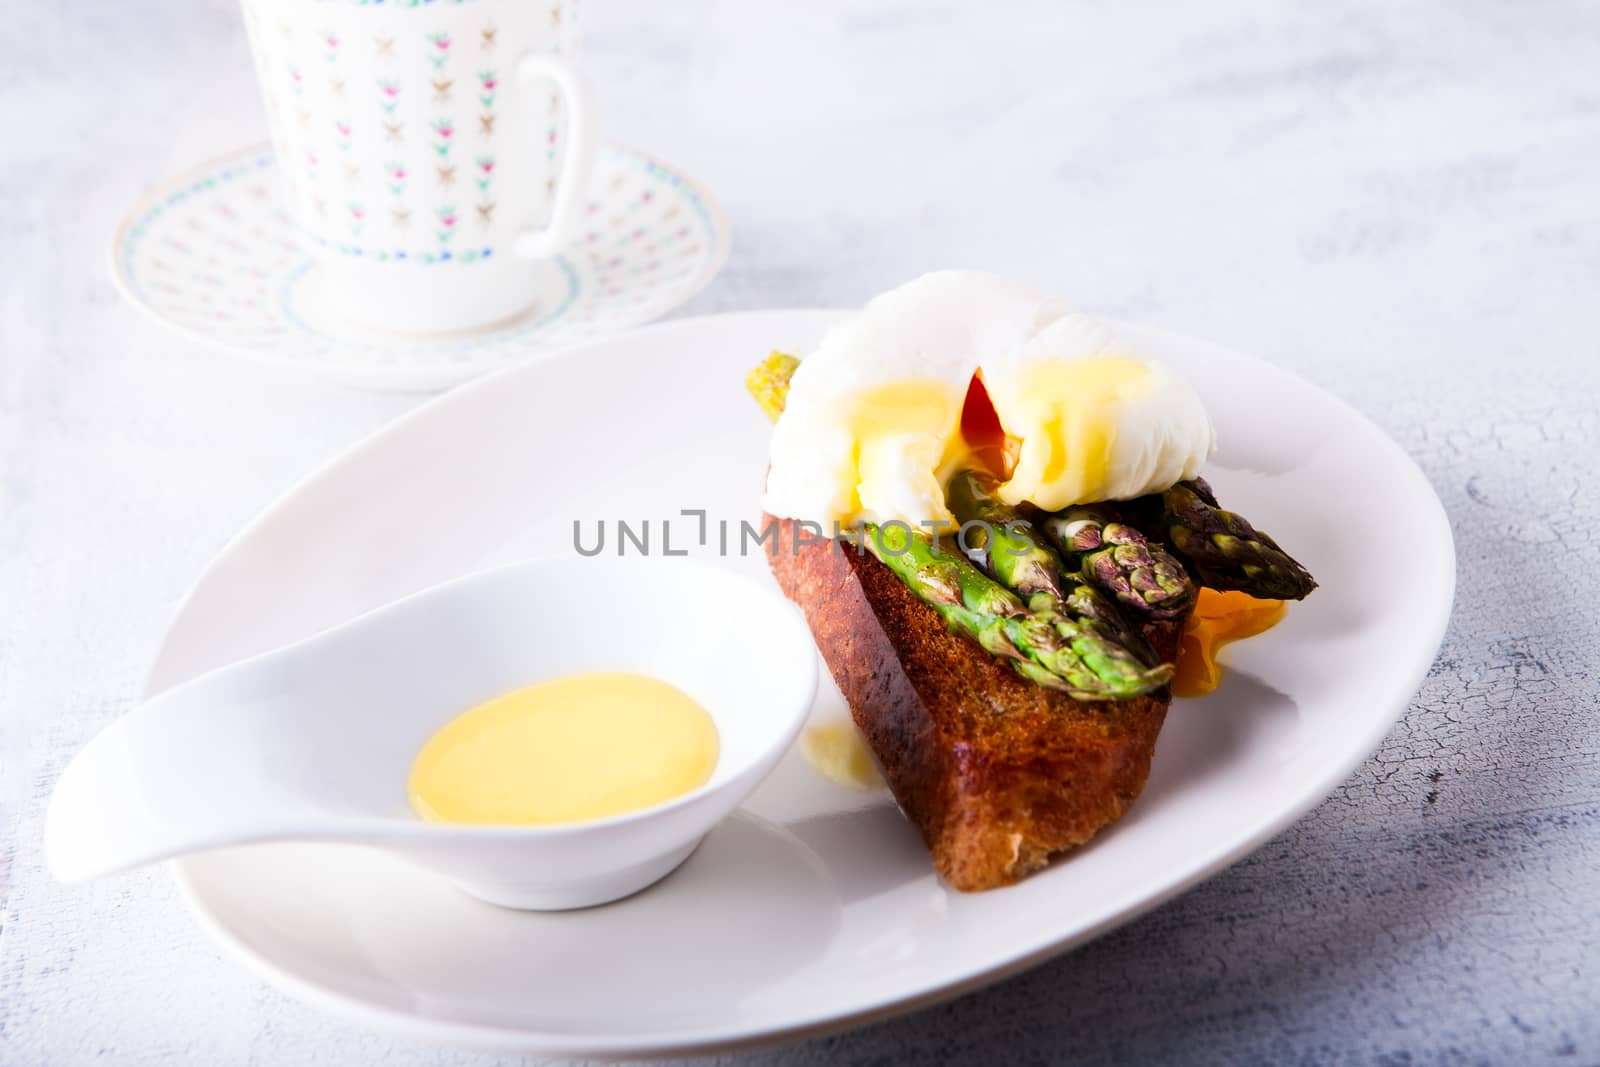 Poached egg and asparagus by supercat67